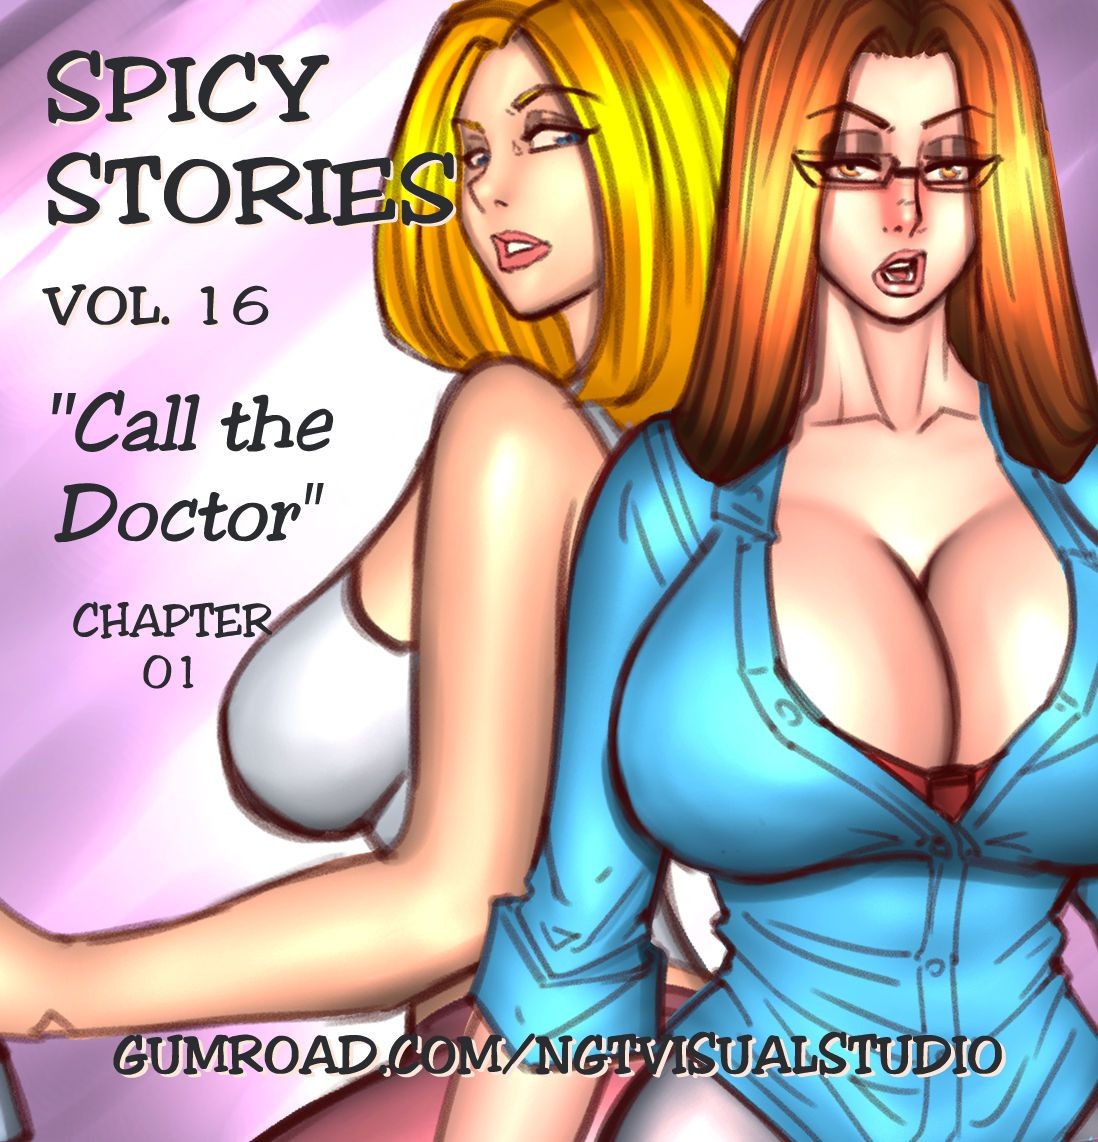 Sweet NGT Spicy Stories 16 - Call The Doctor (Ongoing) NGT Spicy Stories 16 - Call The Doctor (Ongoing) Futanari